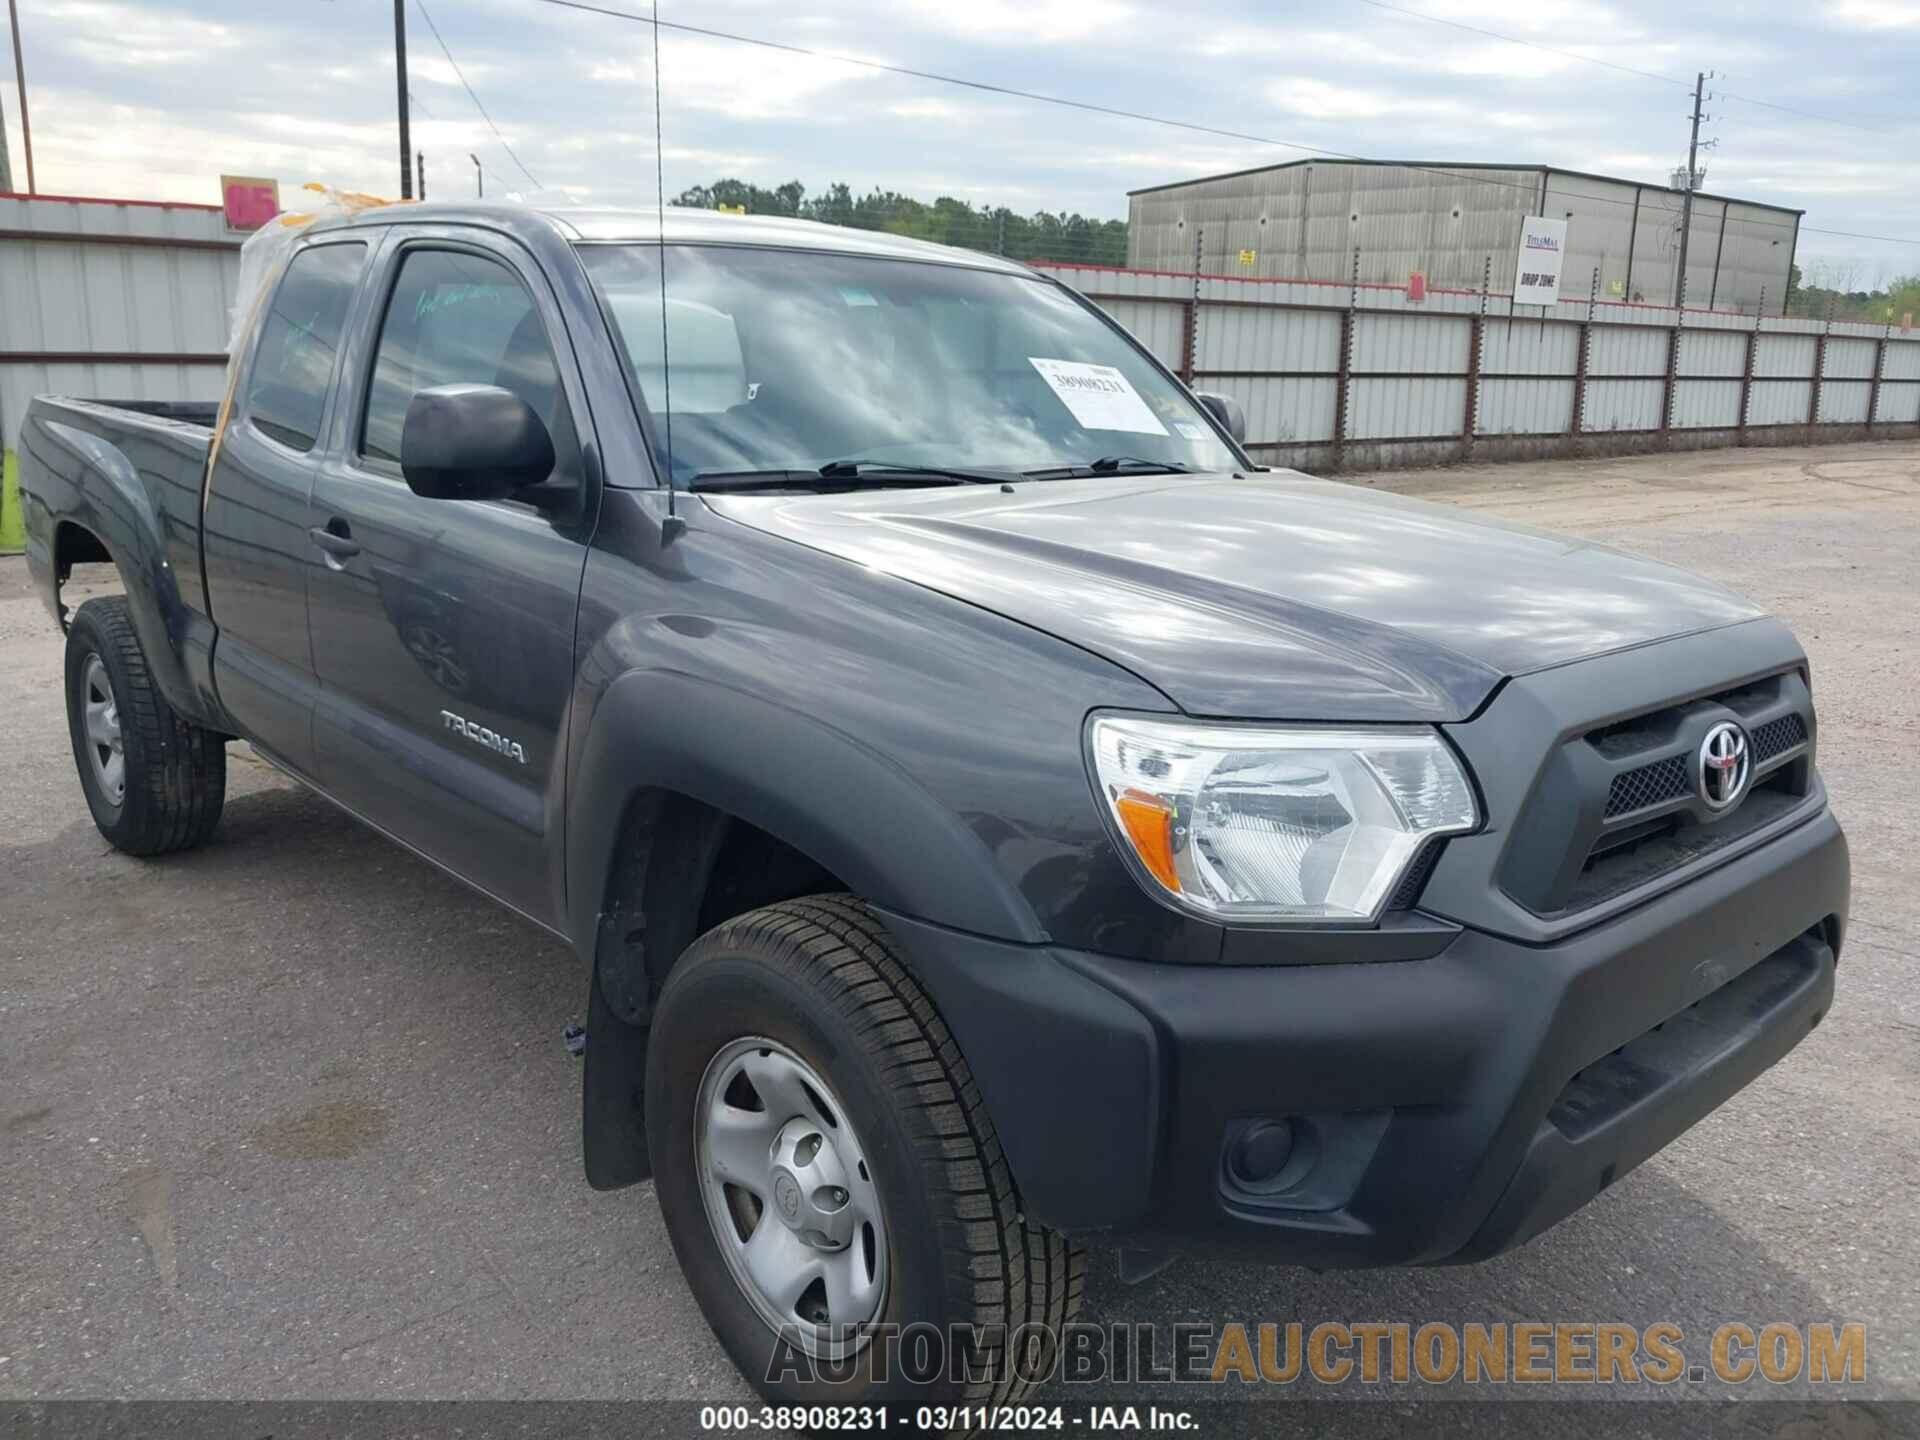 5TFTX4GN7FX037659 TOYOTA TACOMA 2015